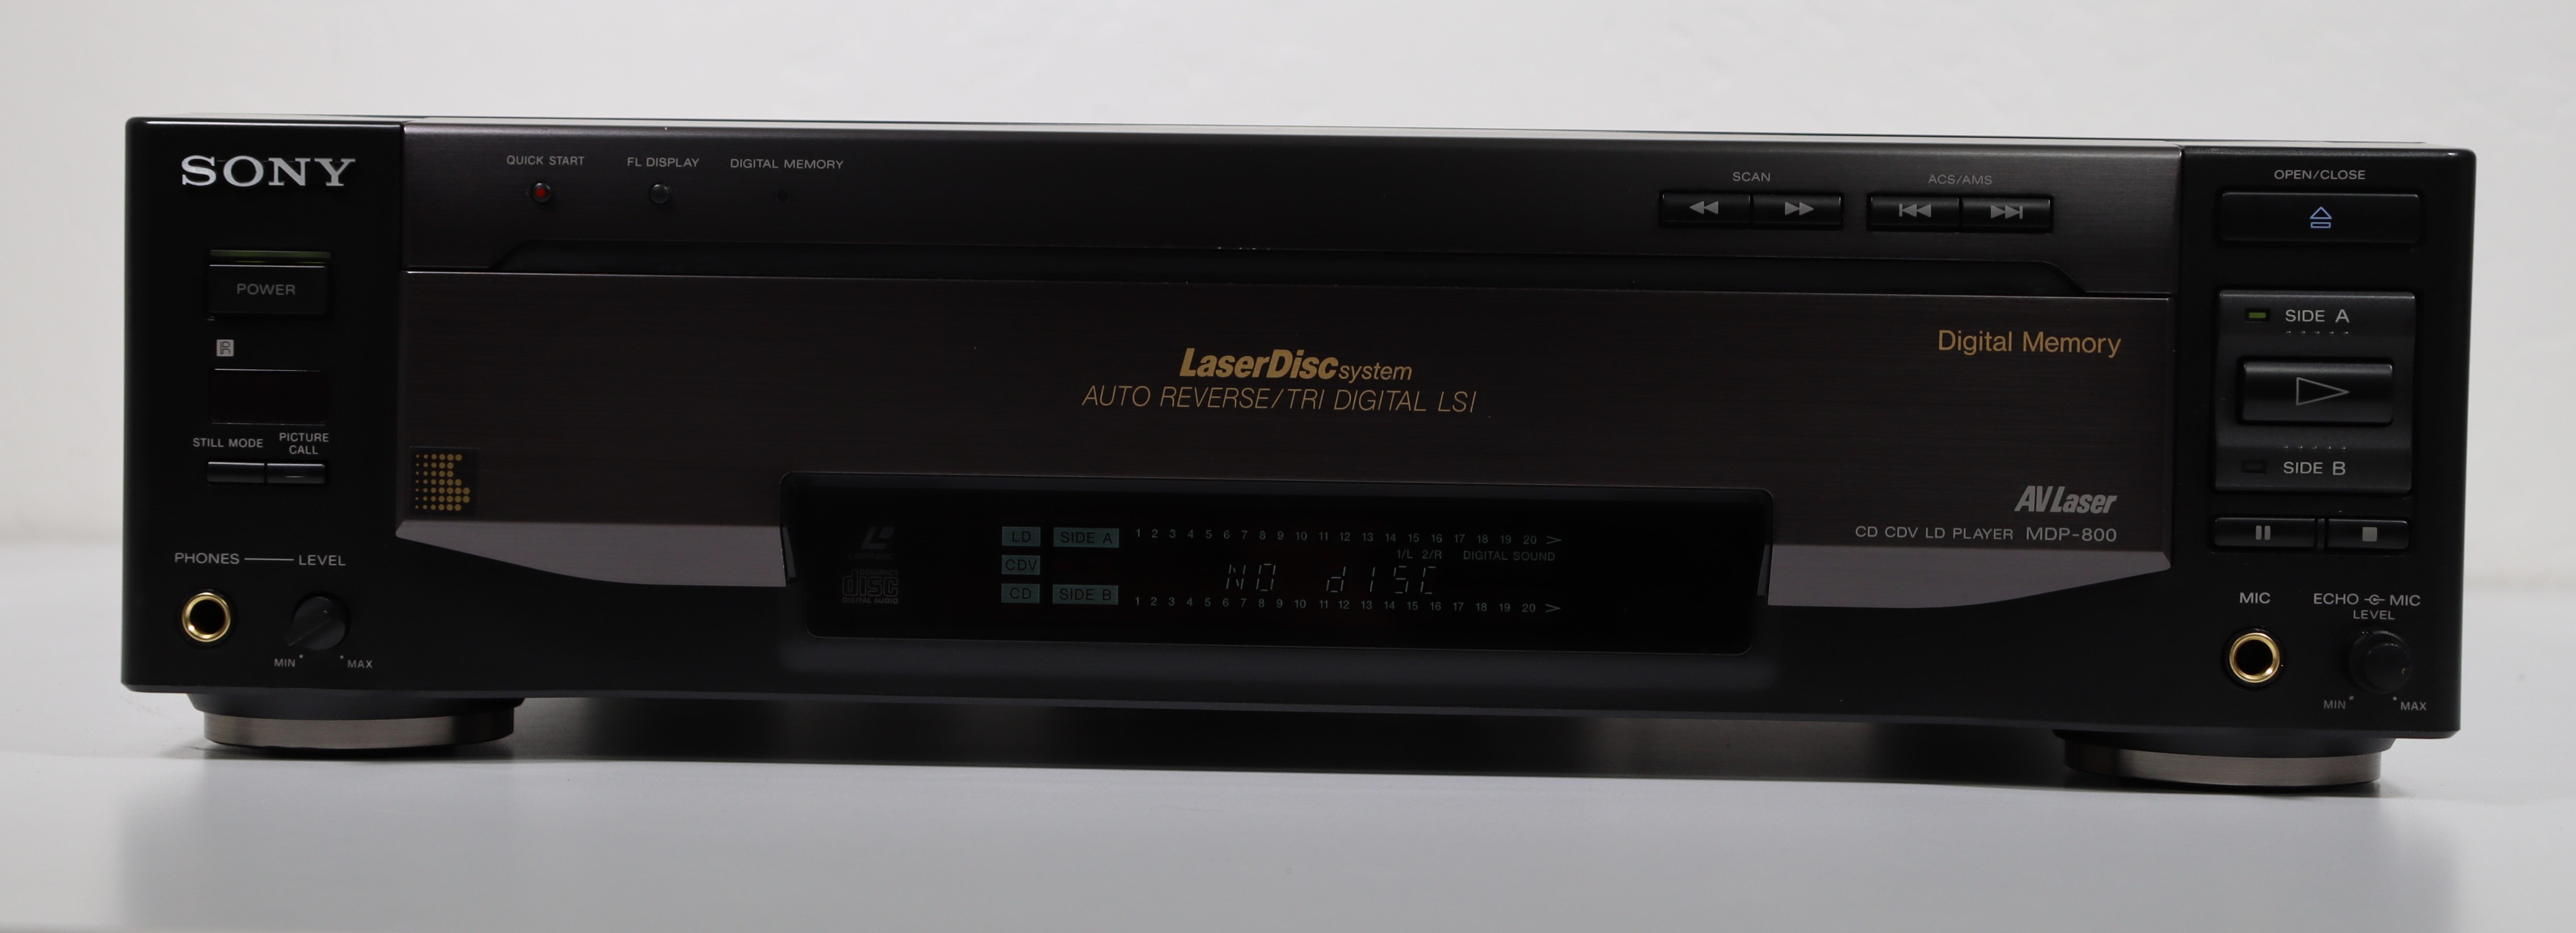 Sony MDP-800 CD CDV LD LaserDisc Player Home Video S-Video Made in Japan (1  Owner